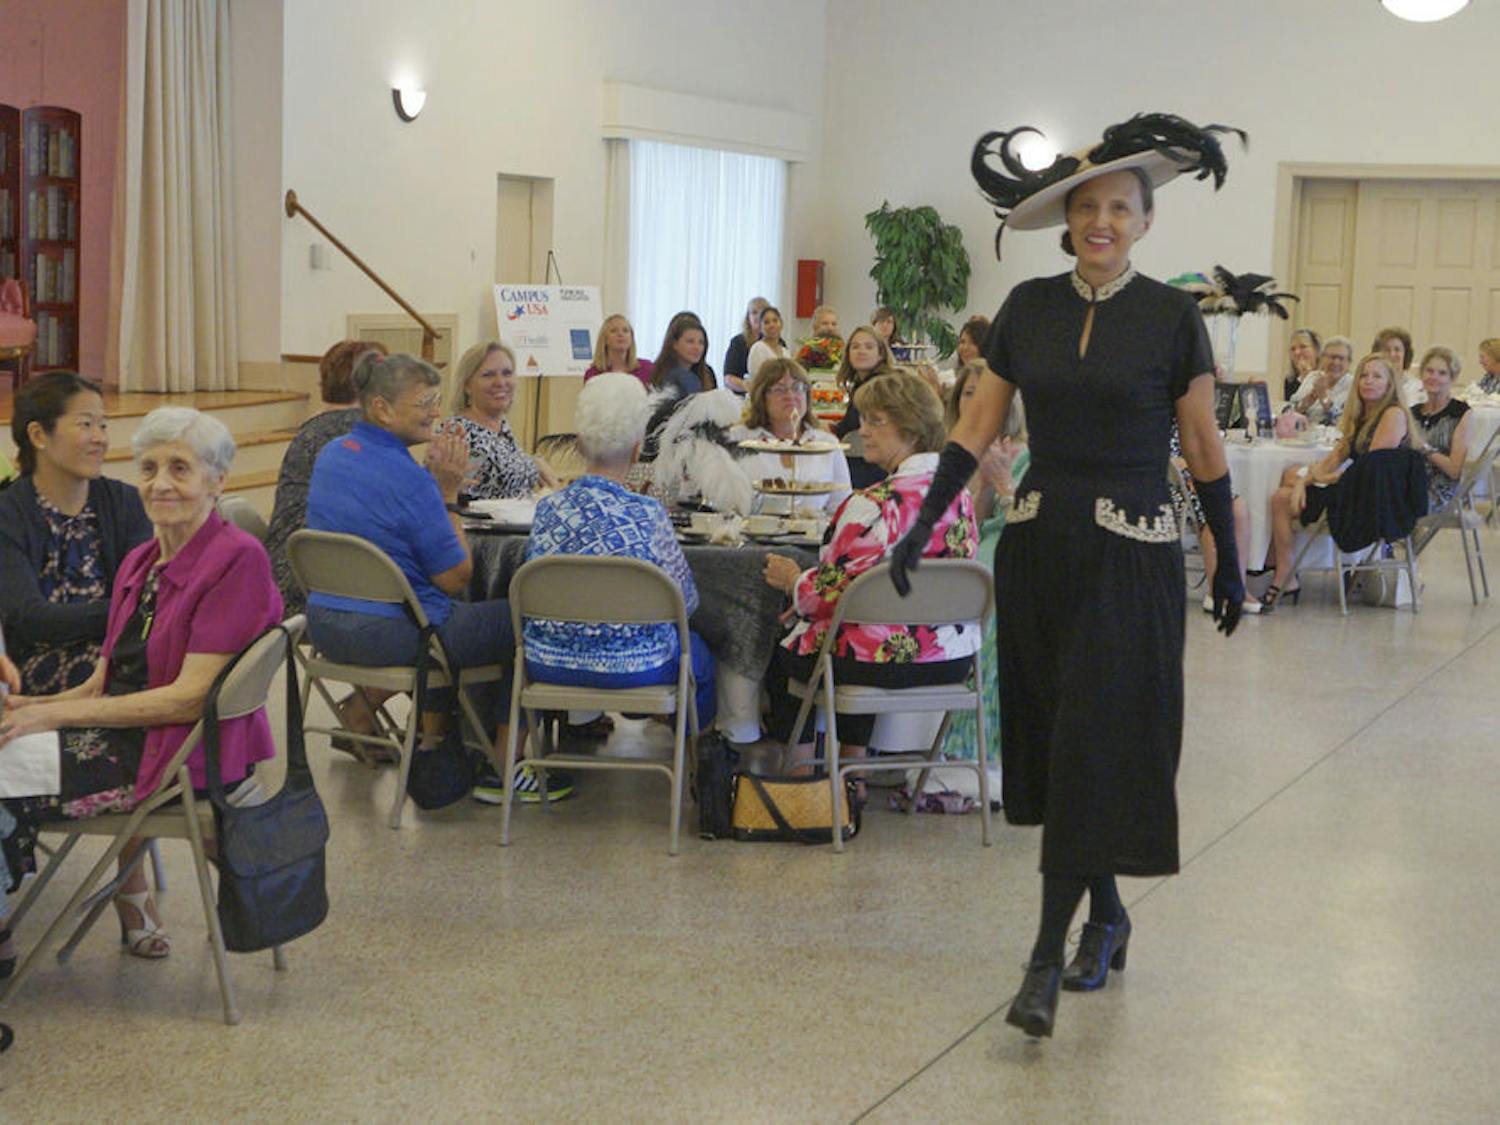 Linda Fuchs, UF President Kent Fuchs' wife, walks down the runway in era clothing during a time period fashion show at the Gainesville Woman’s Club Sept. 10, 2015. The event raised money for the Climb for Cancer Foundation and the oncofertility program at UF.